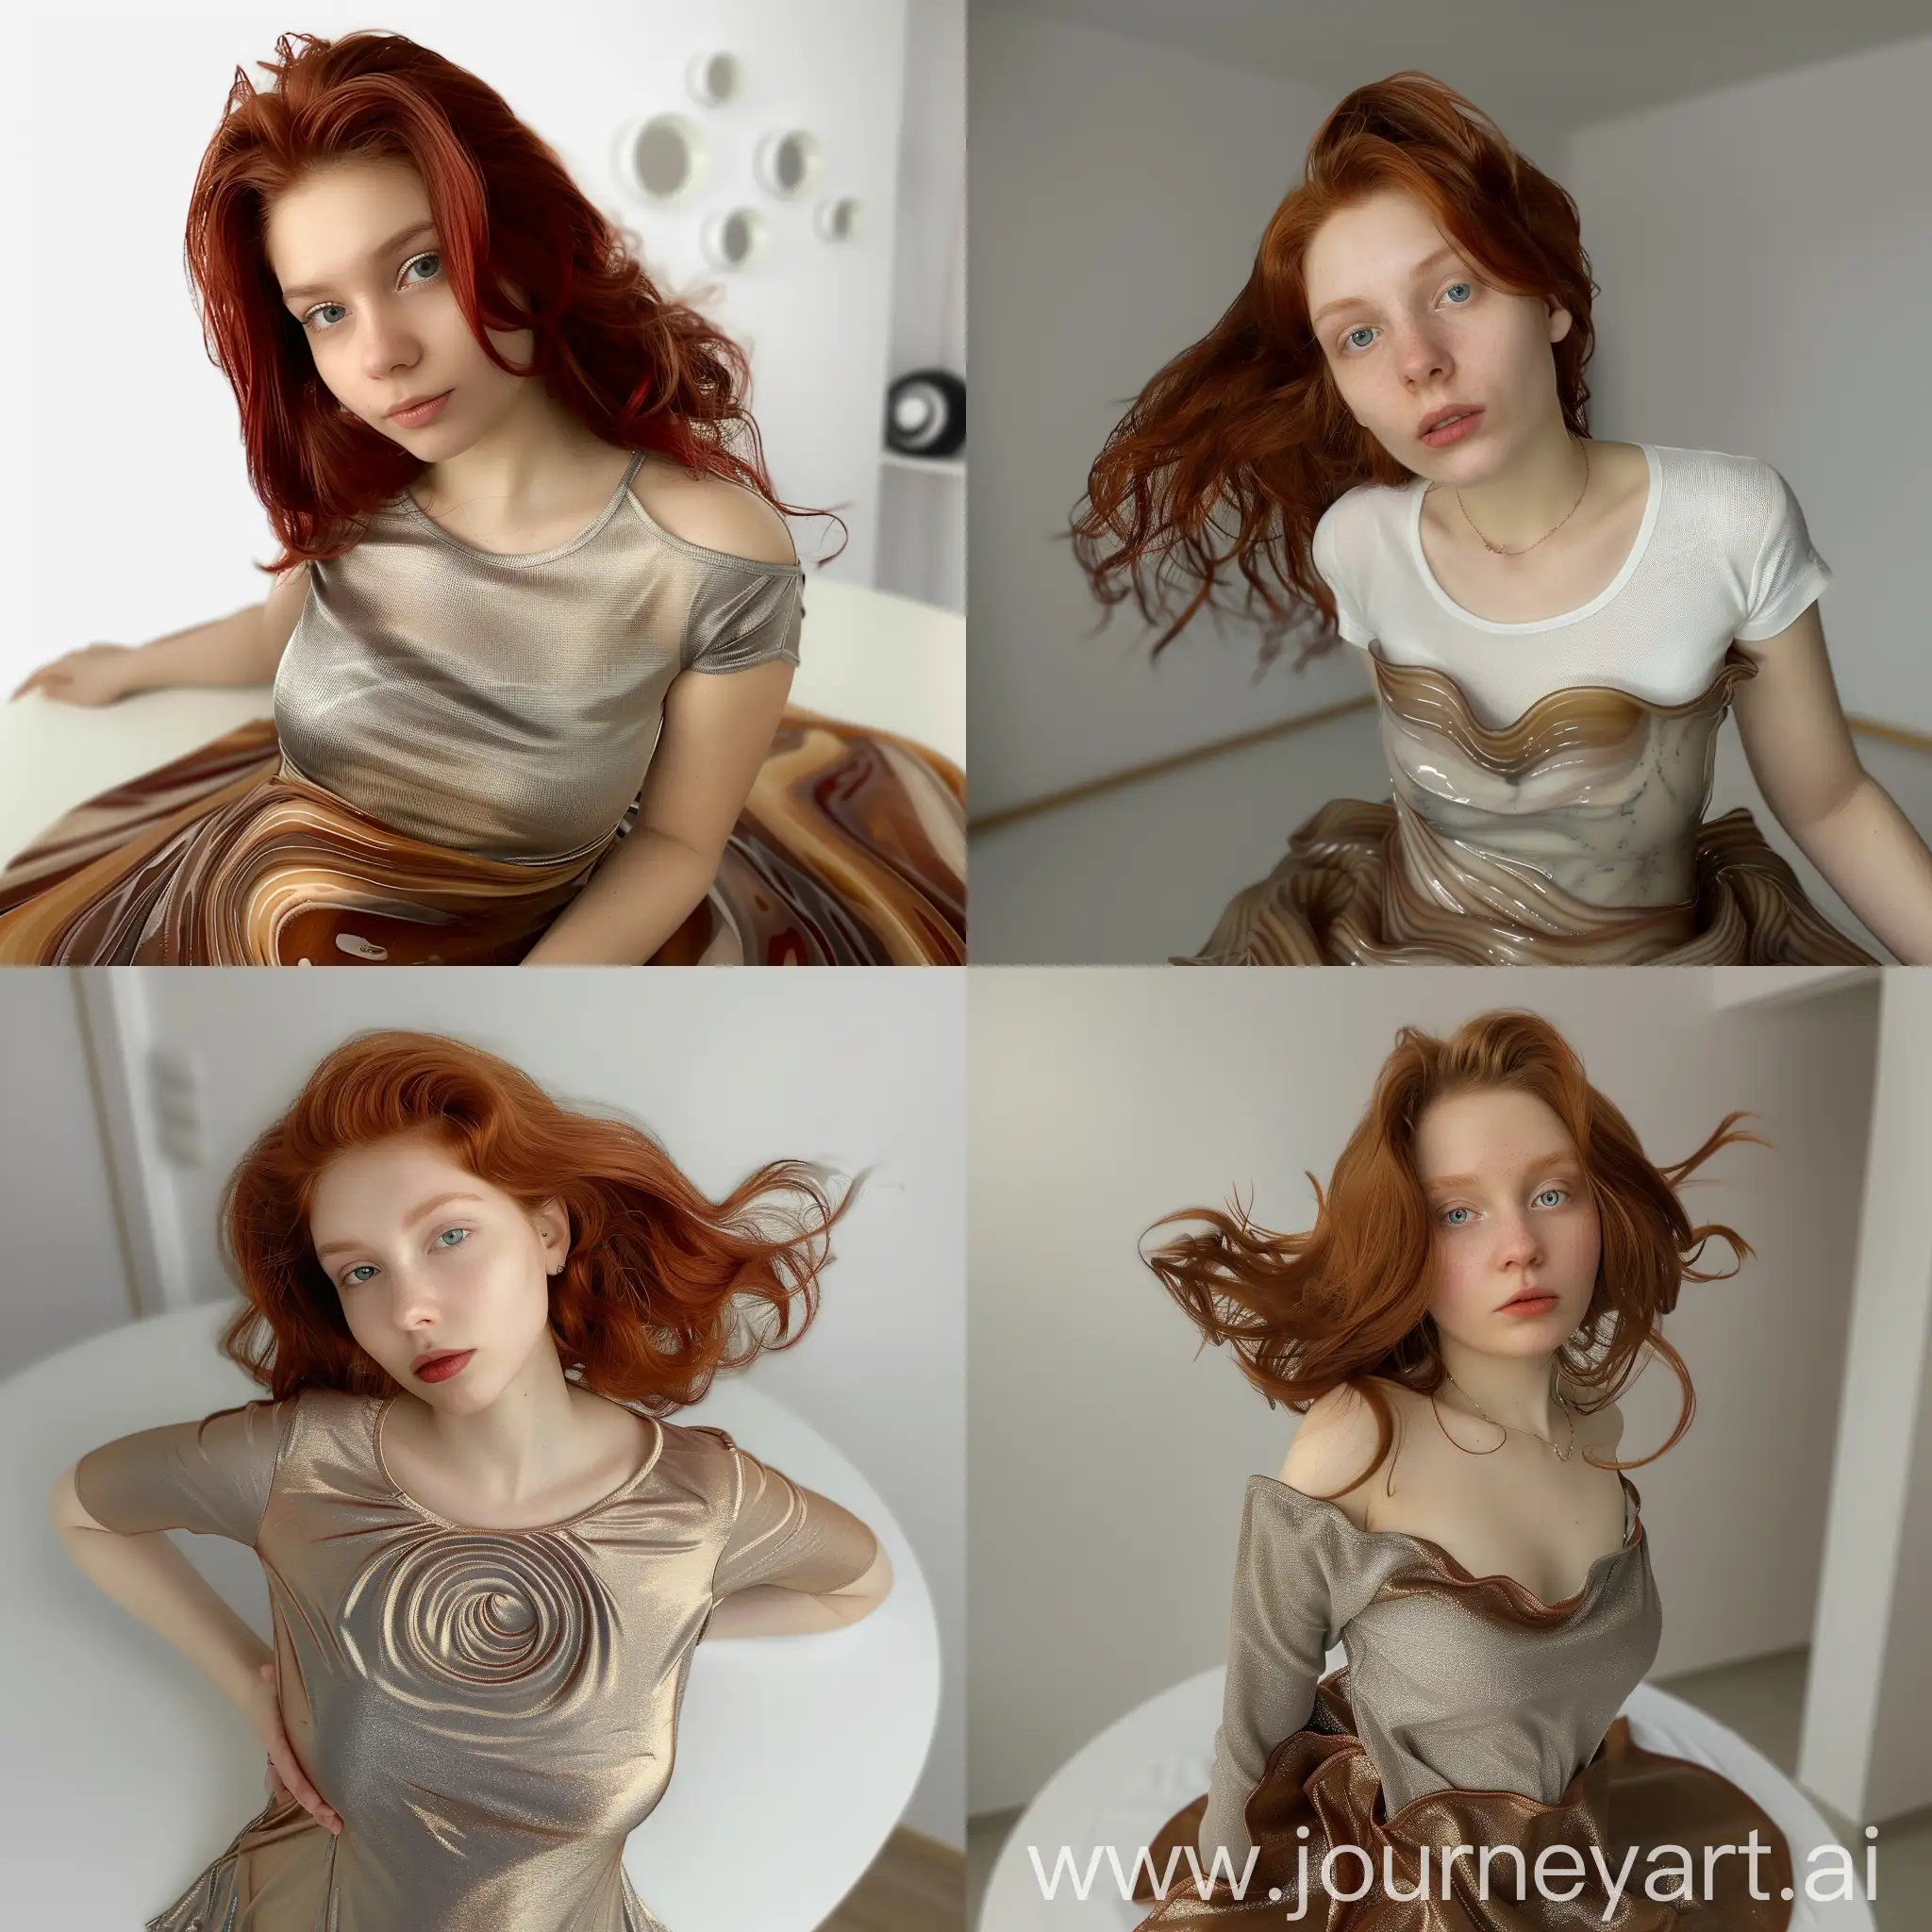 RedHaired-Girl-in-Liquid-Dress-on-White-Background